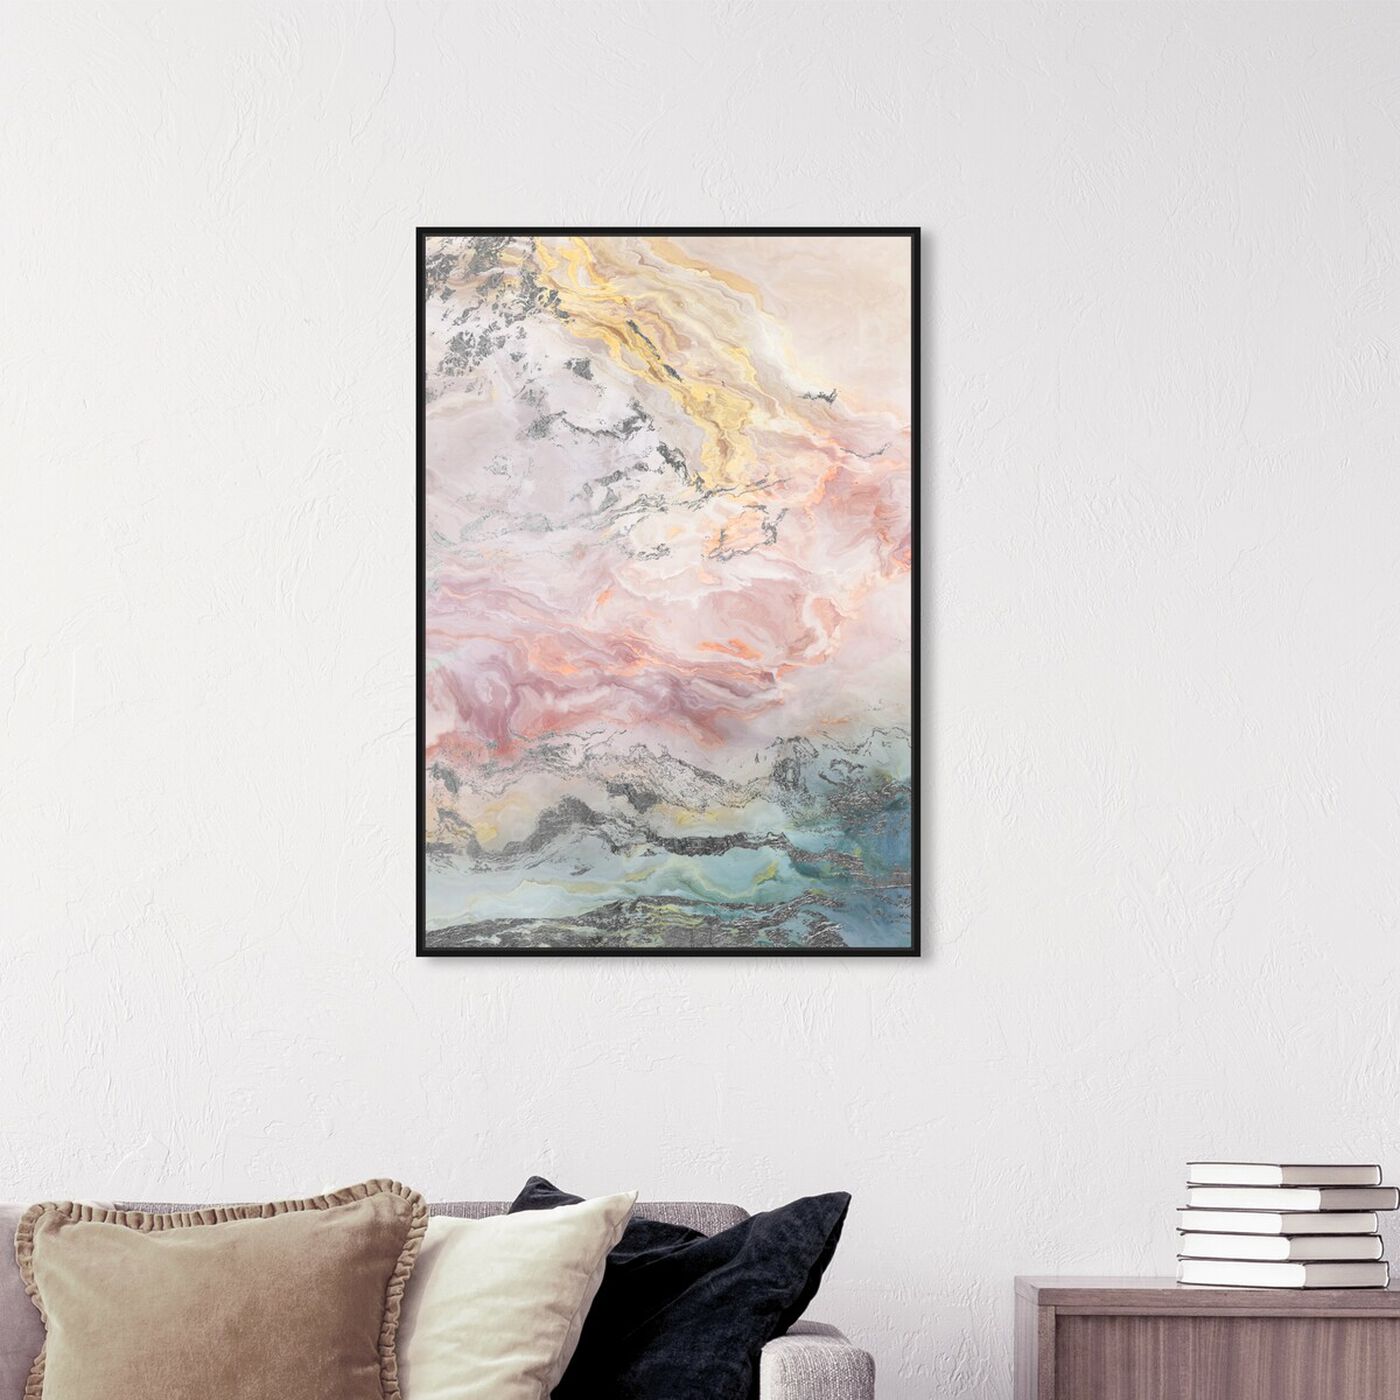 Hanging view of Gracinat featuring abstract and crystals art.